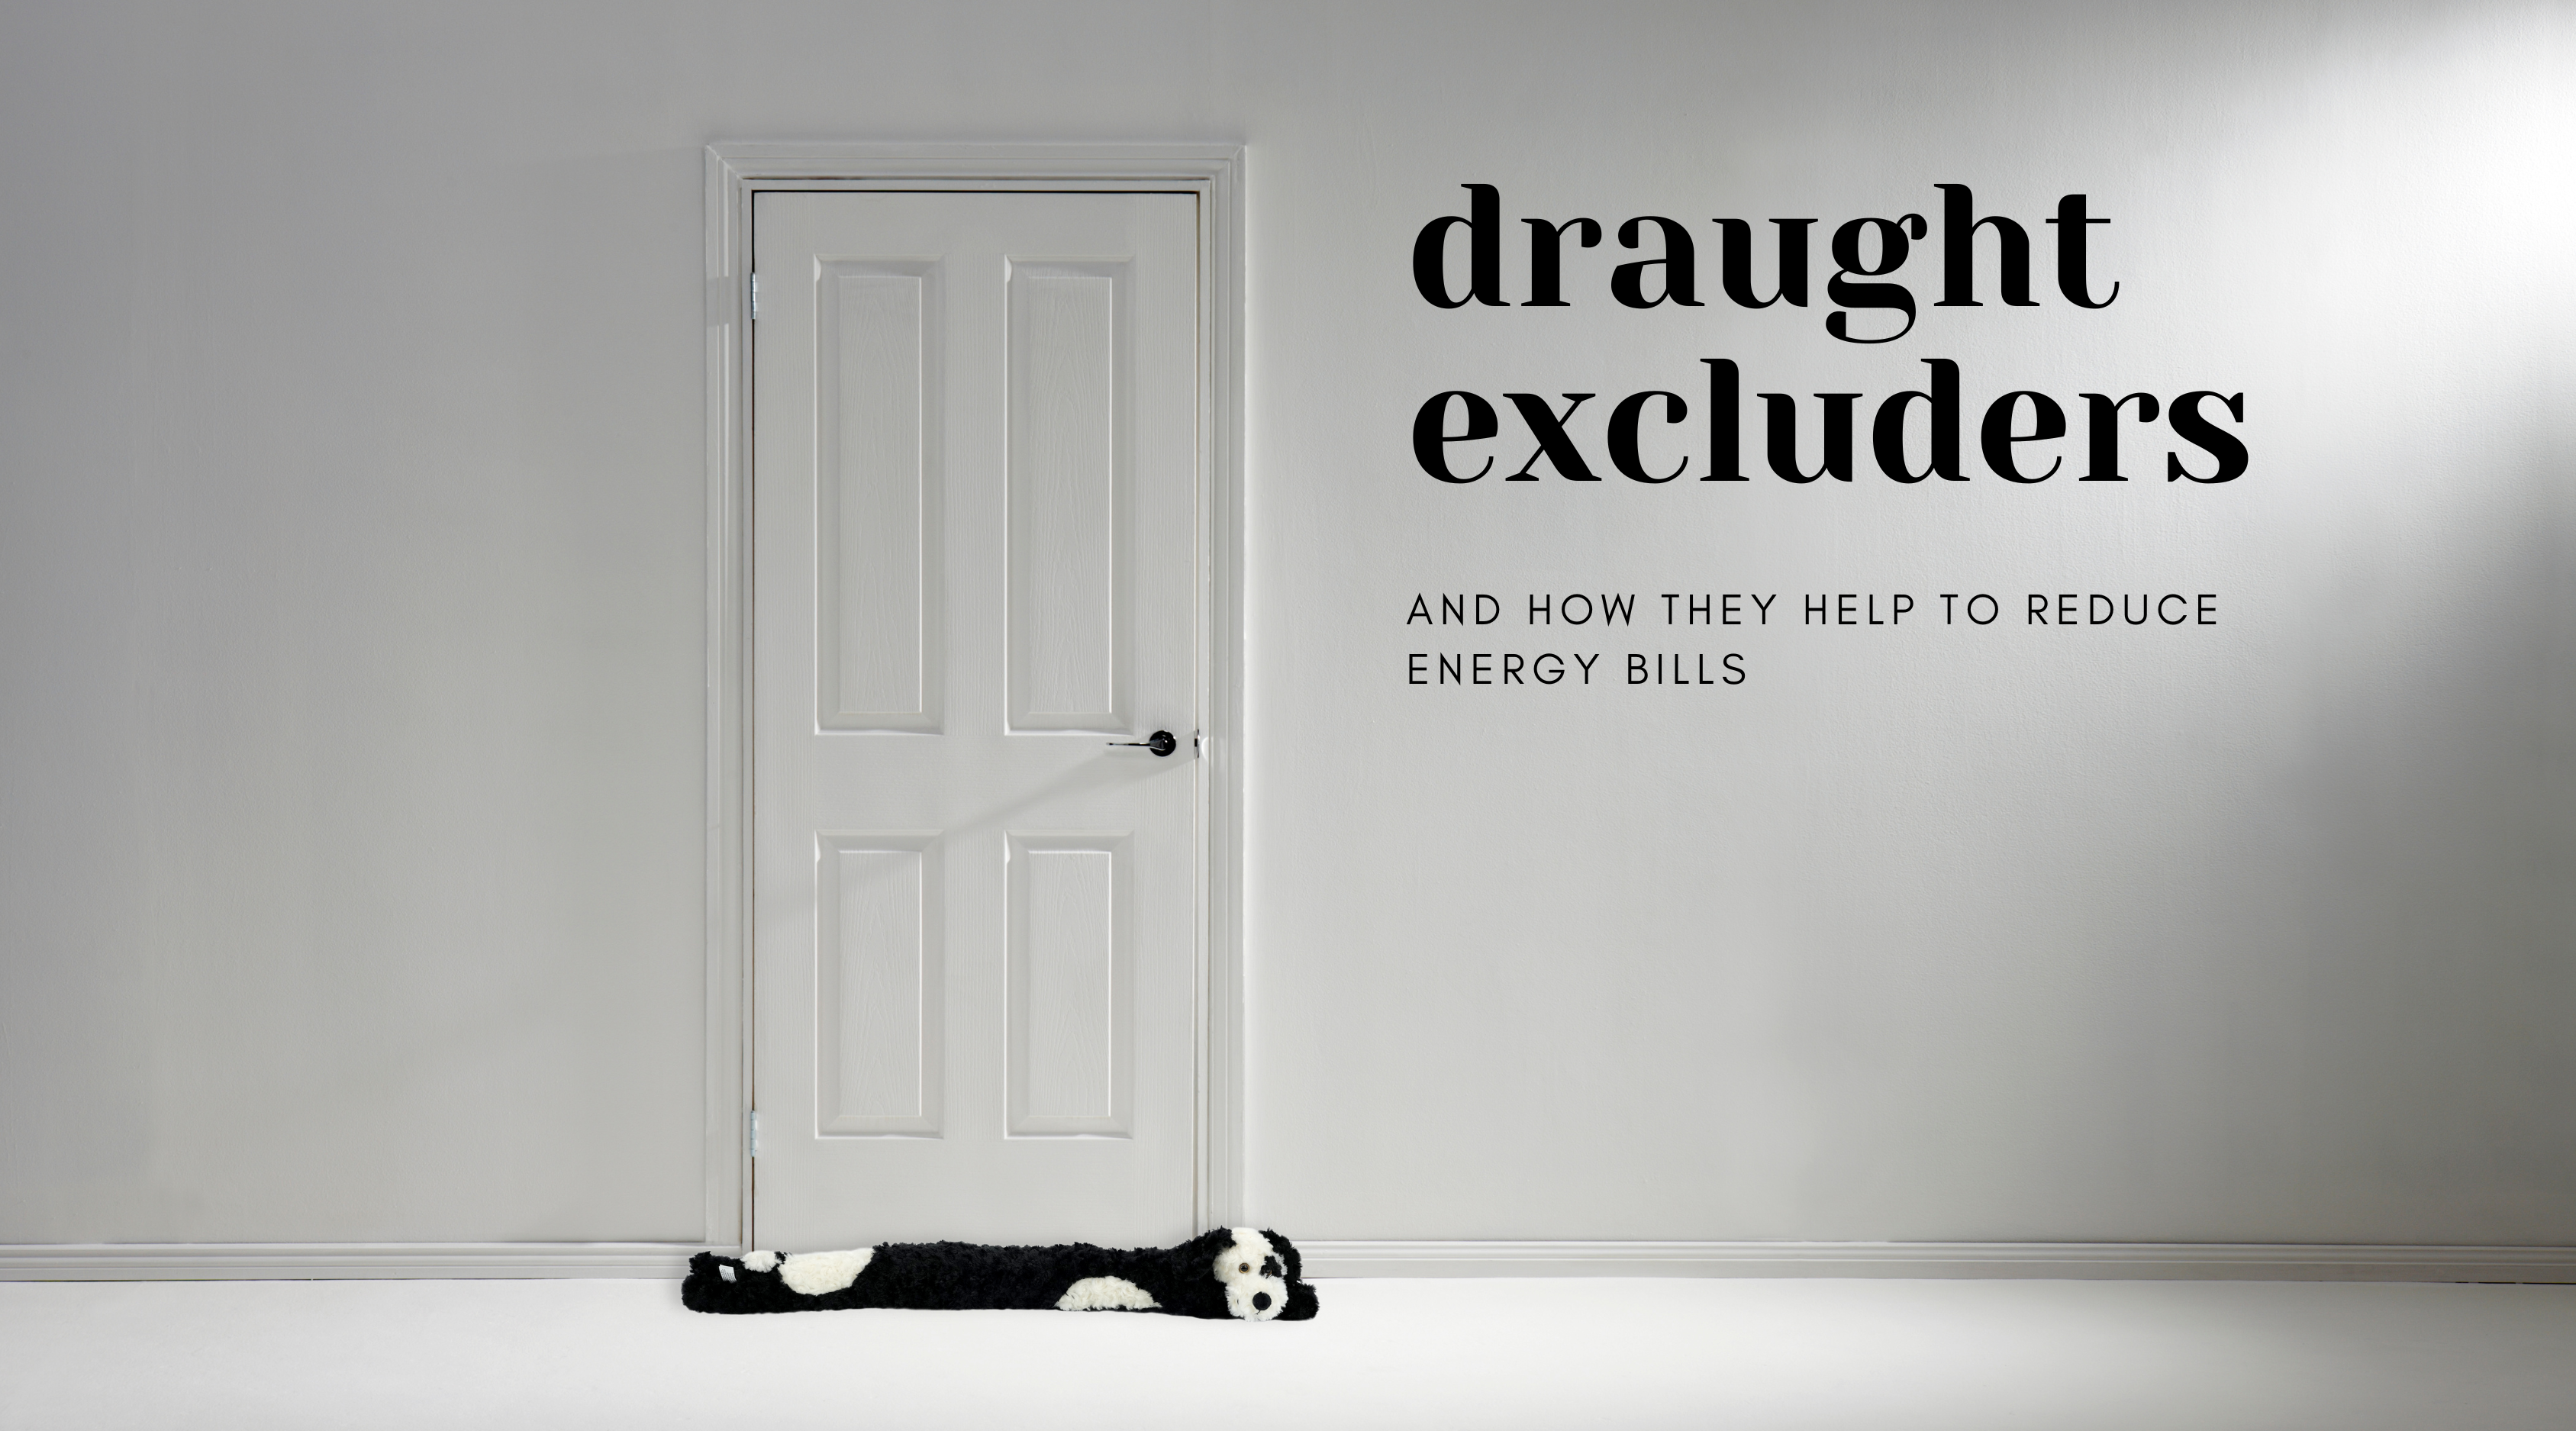 draught excluder energy bills how to safe money how to reduce energy bills